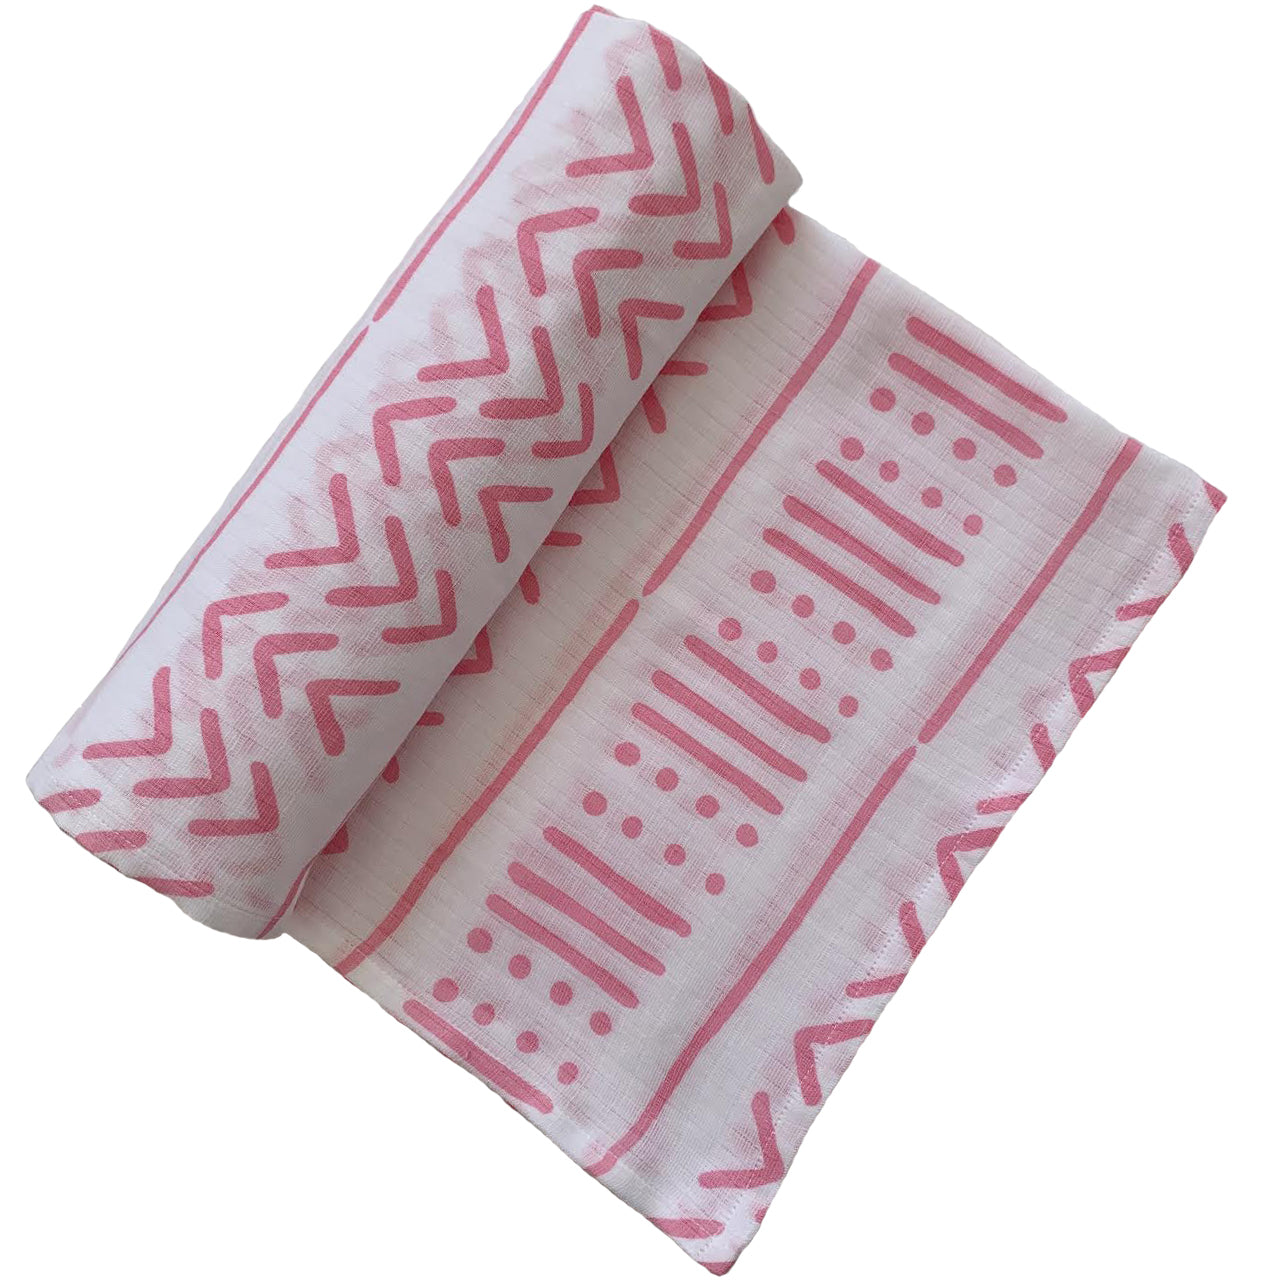 SpearmintLOVE’s baby Muslin Swaddle Blanket, White/Pink Mudcloth